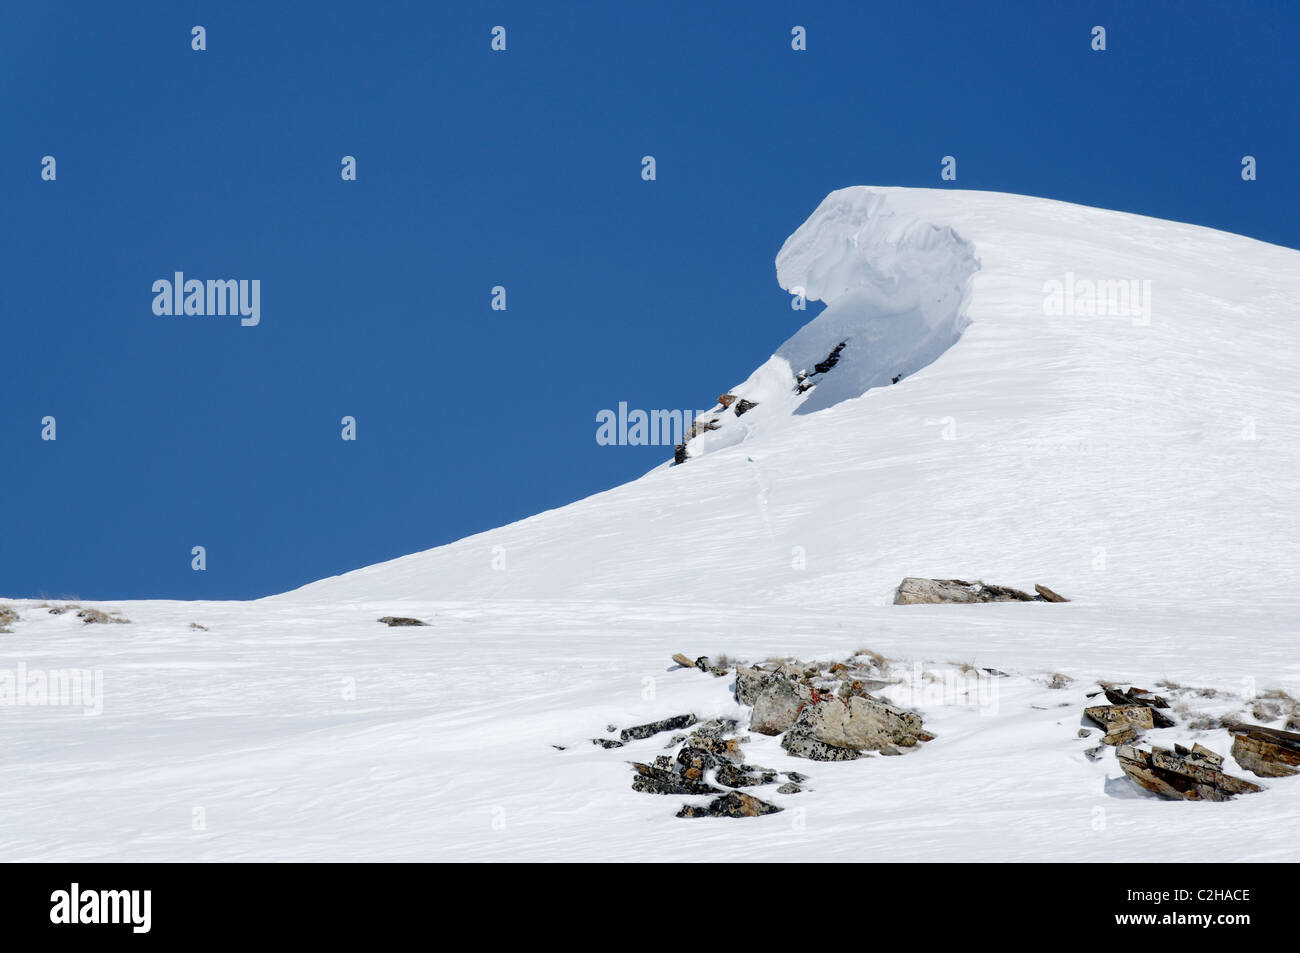 Windslab avalanche, cornice and debris in the Haute Maurienne, French Alps. Stock Photo